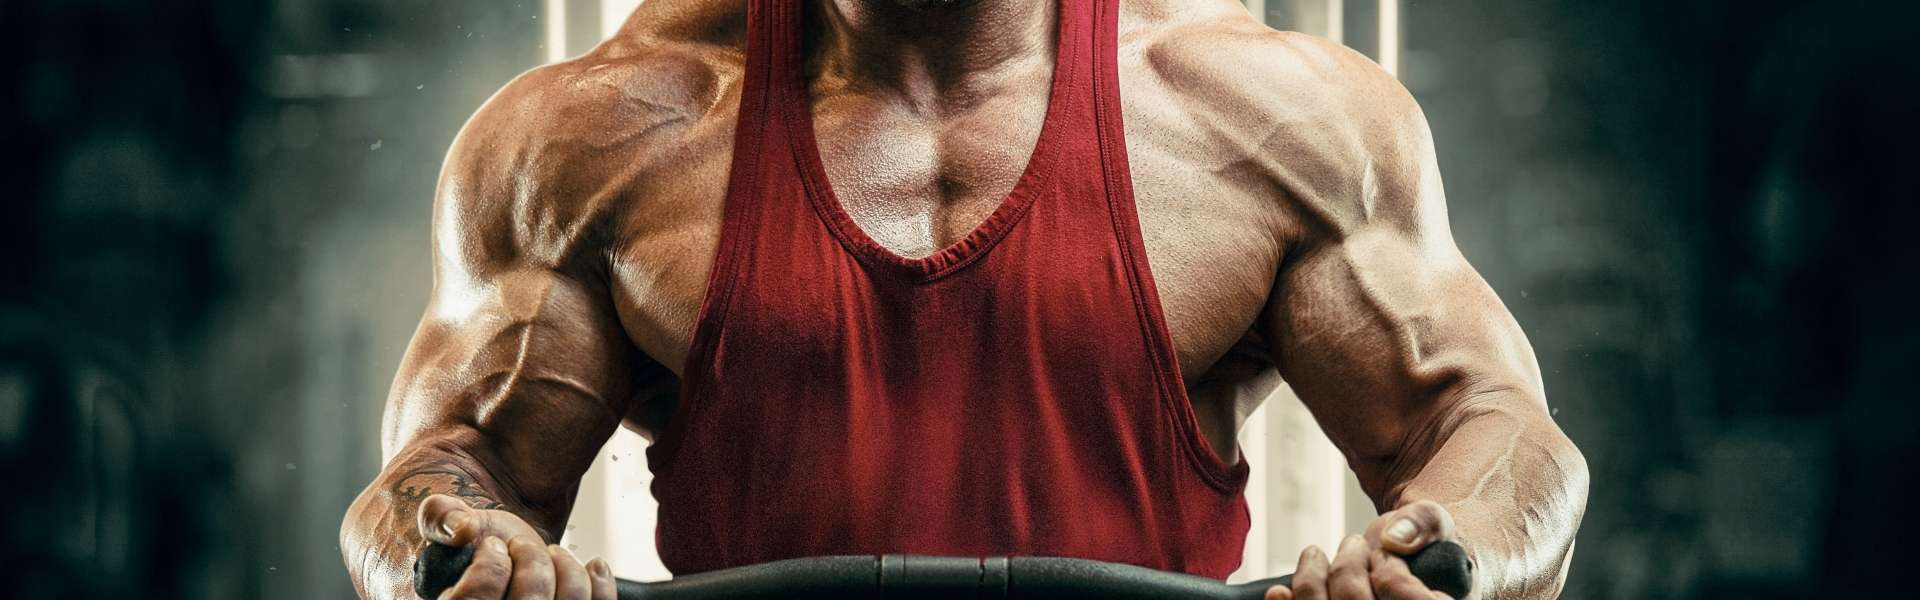 Creatine: the queen of performance supplements